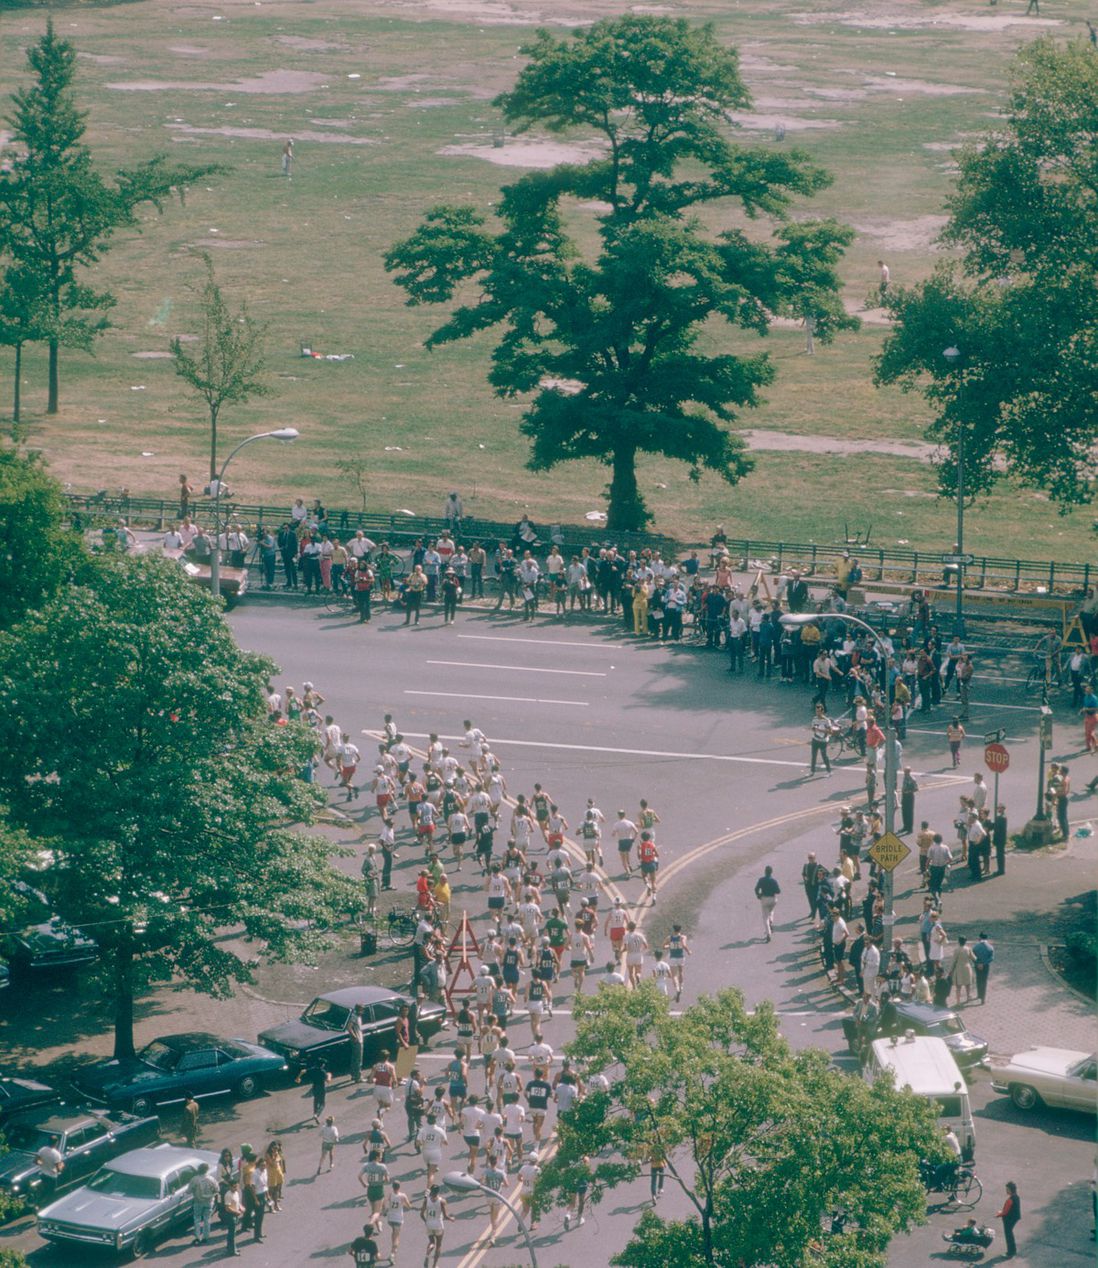 Runners in the first New York City Marathon turn onto Park Drive in Central Park, 1970. (Ruth Orkin/<a href="http://www.orkinphoto.com/">Ruth Orkin Photo Archive</a>)